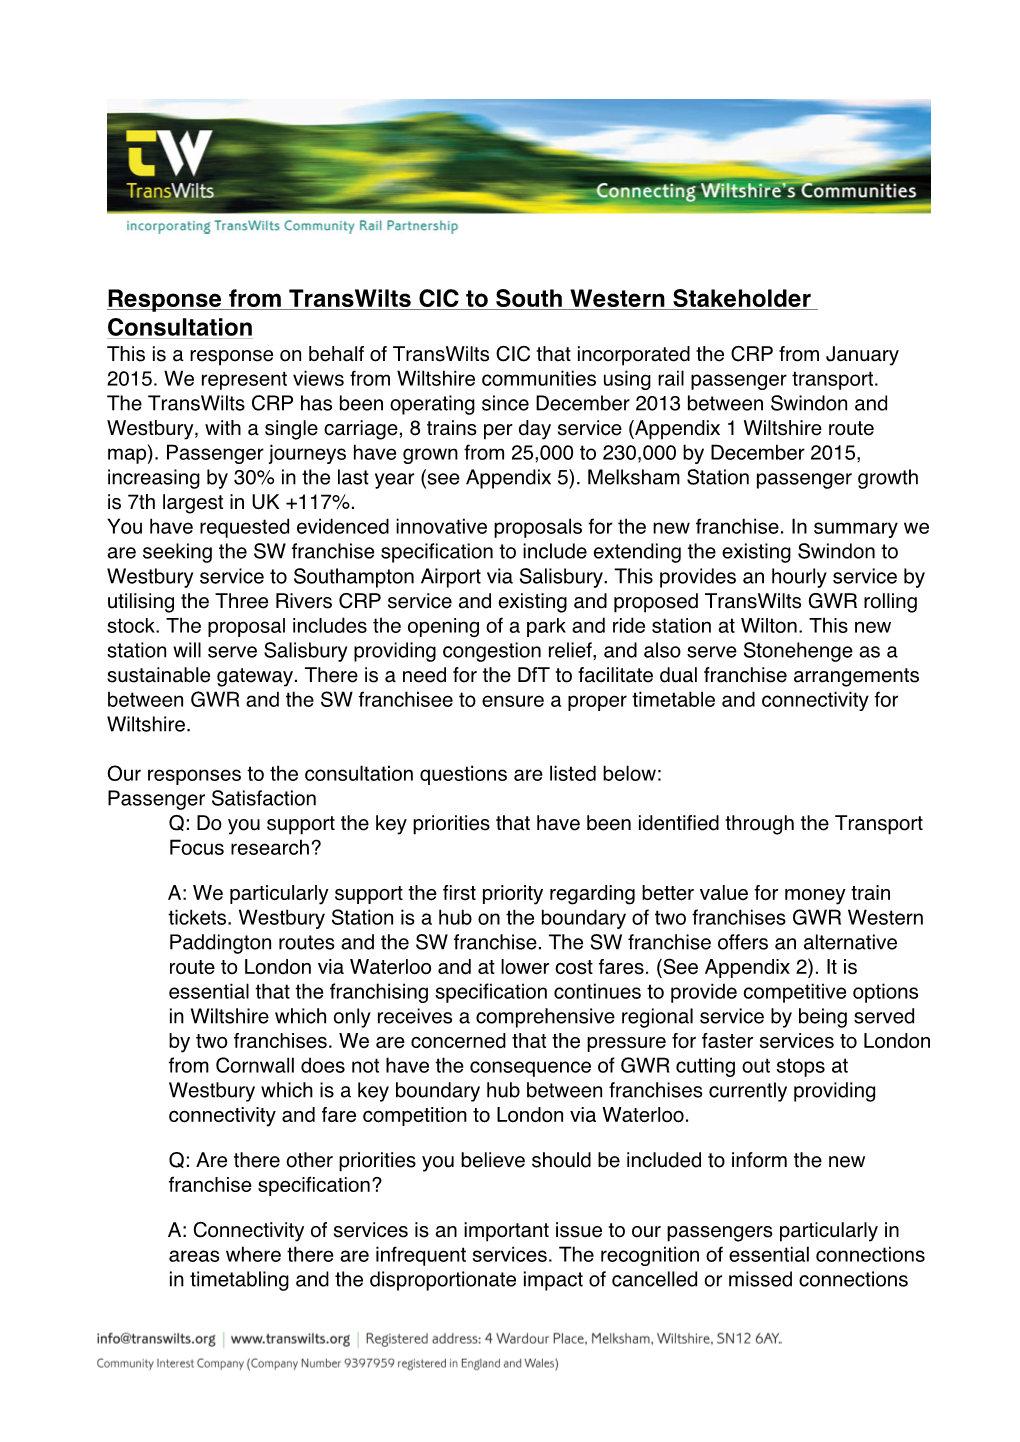 Response from Transwilts CIC to South Western Stakeholder Consultation This Is a Response on Behalf of Transwilts CIC That Incorporated the CRP from January 2015